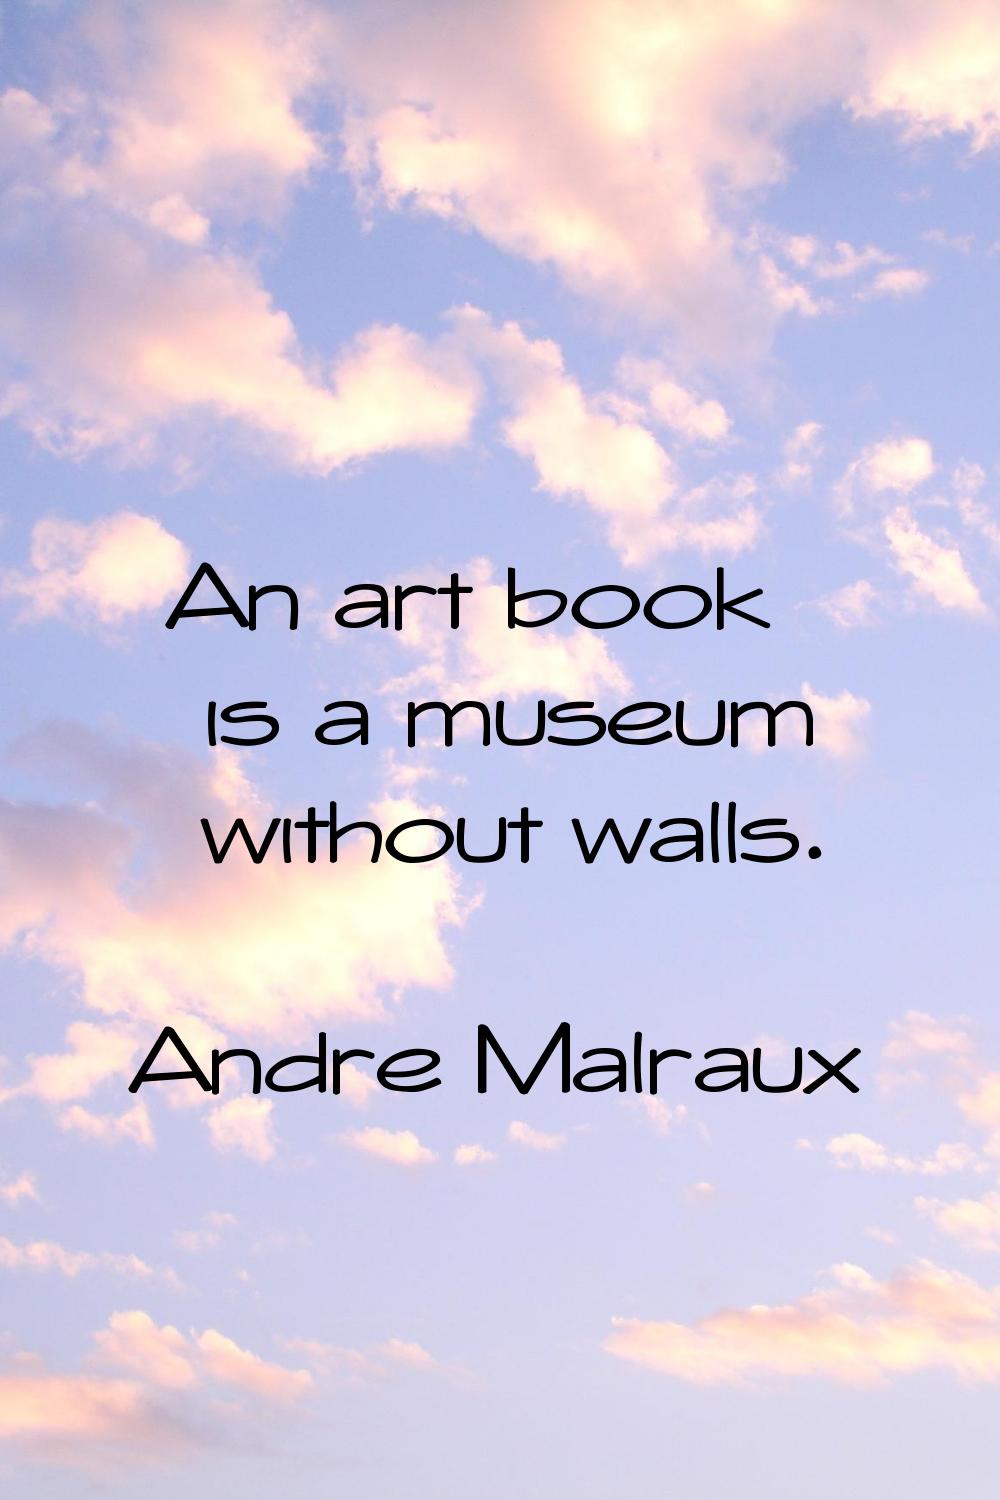 An art book is a museum without walls.